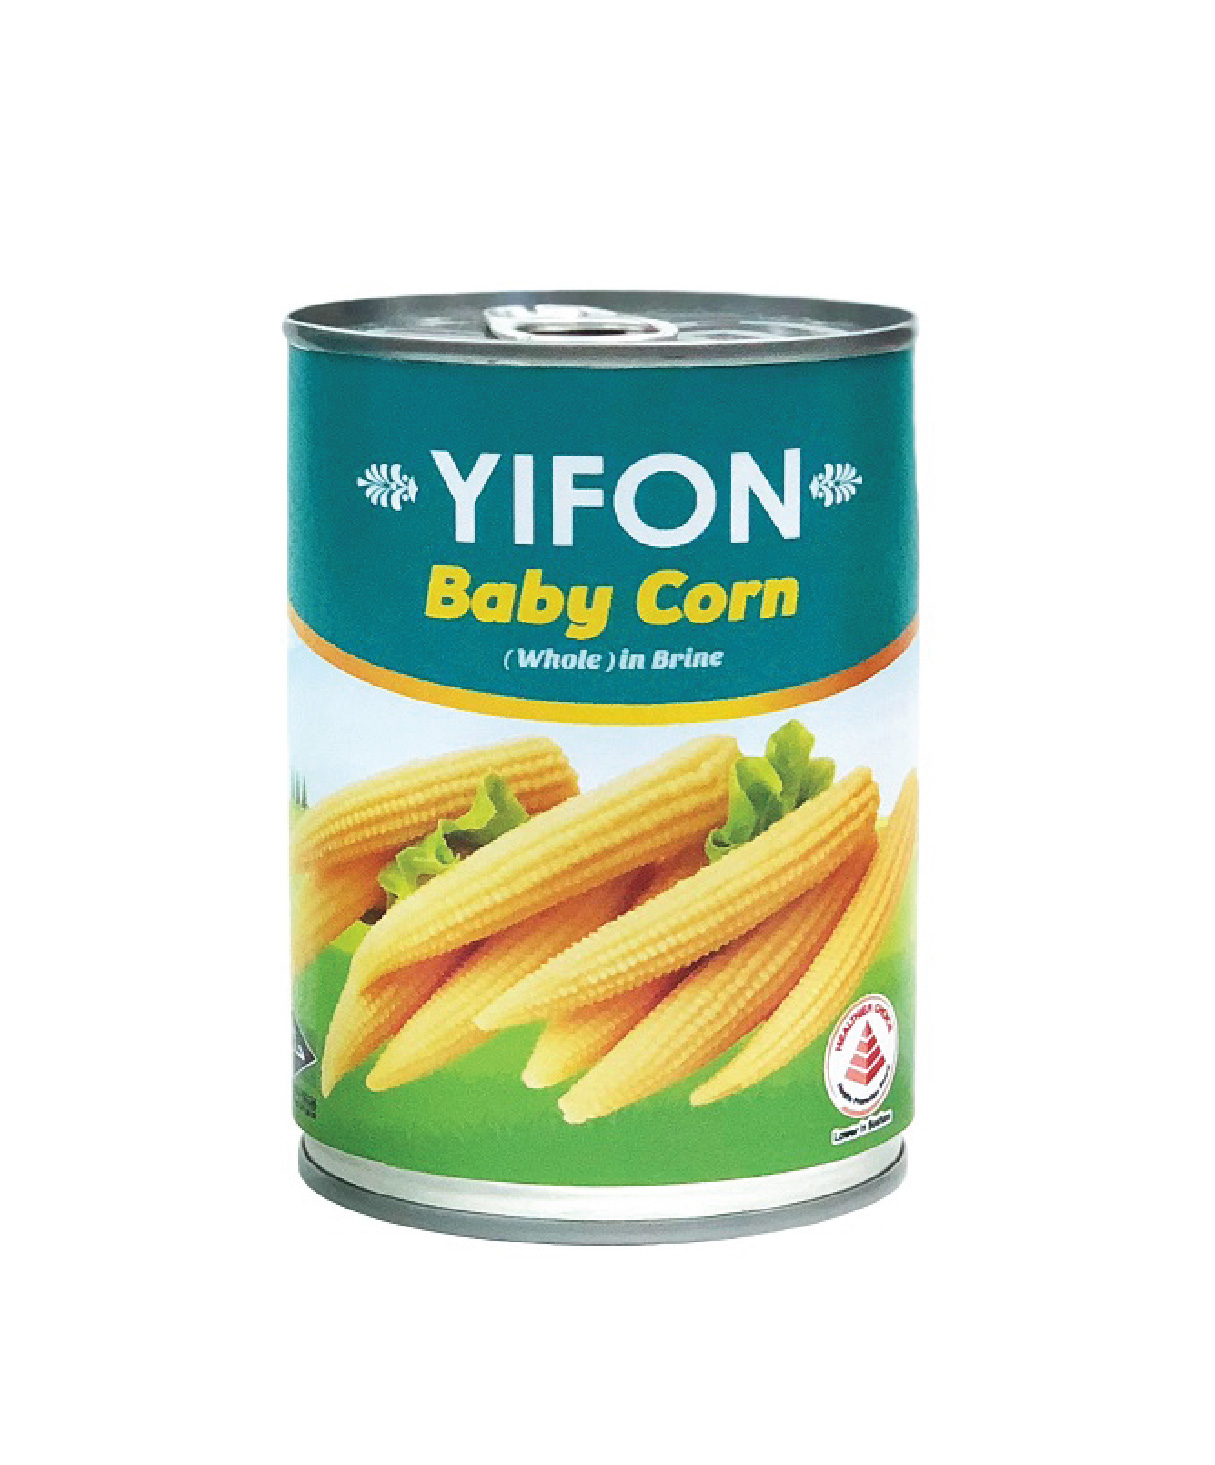 CANNED YOUNG CORN (WHOLE)